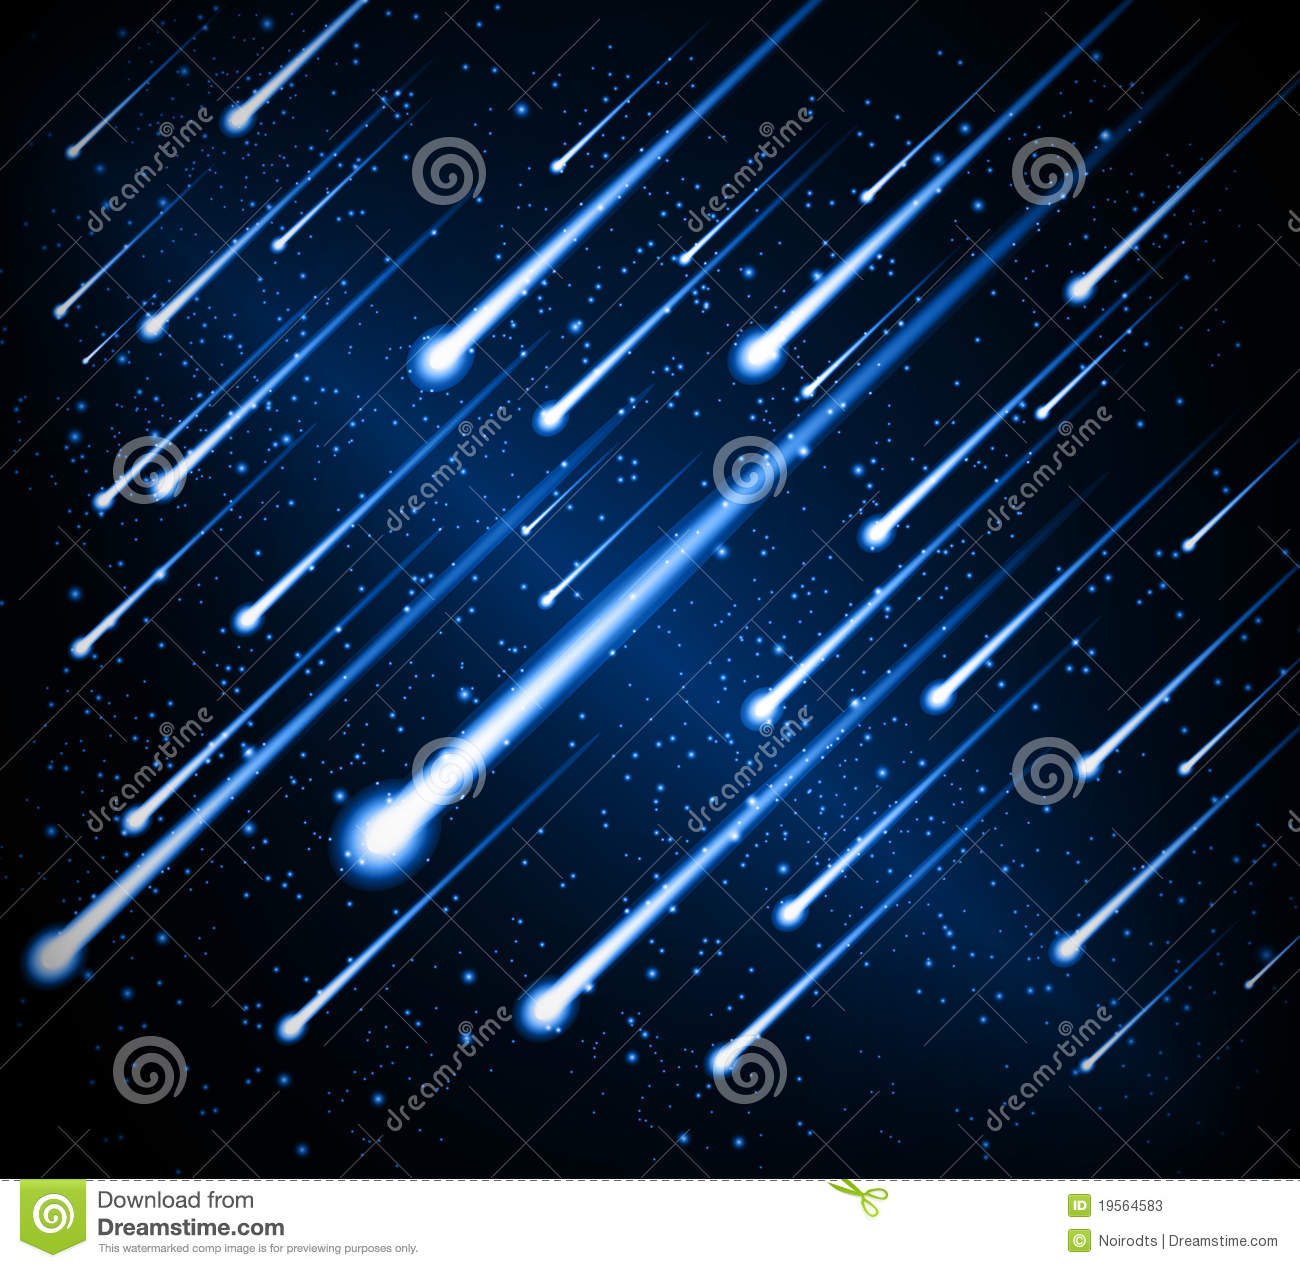 Meteor Shower clipart #14, Download drawings